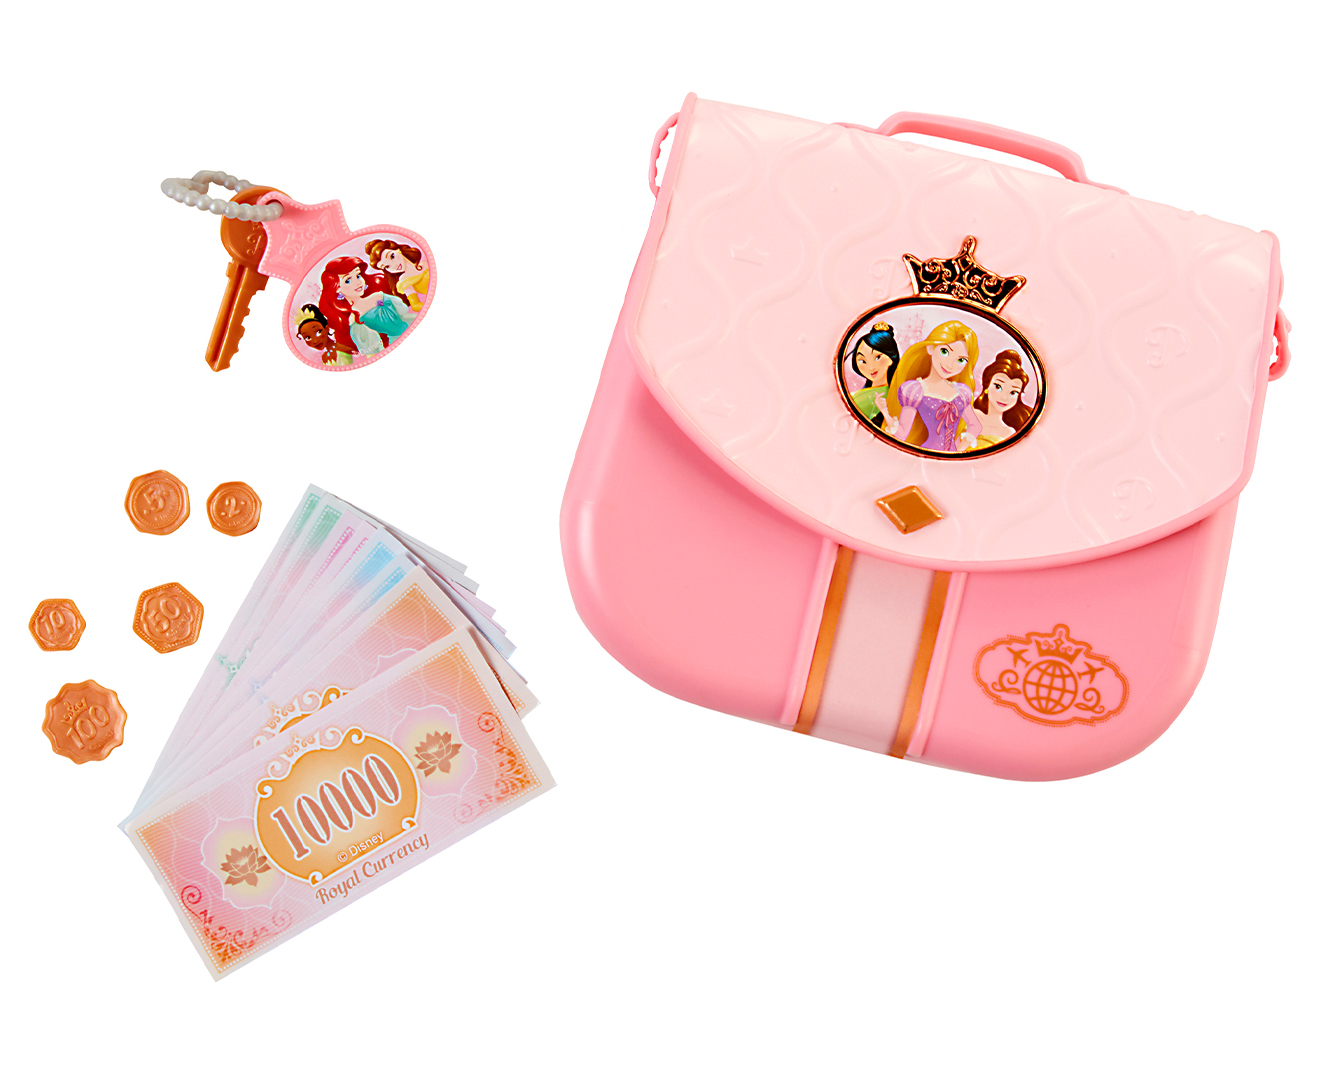 Buy Disney Princess Pink Mini Purse - Disney Princess Bag with Adjustable  Strap Online at Low Prices in India - Amazon.in